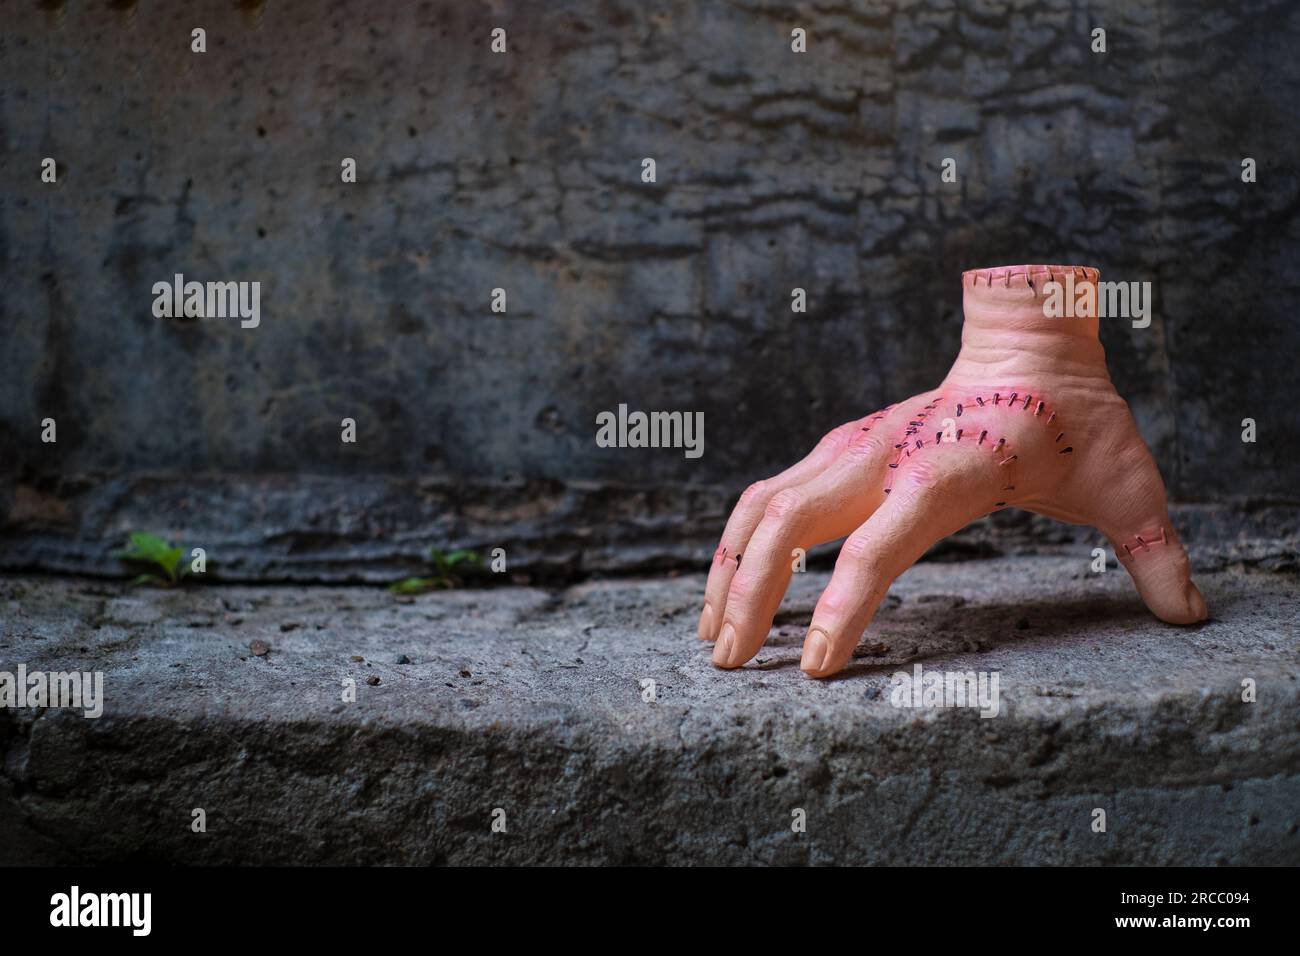 Realistic human hand or Thing with scars and stiches. Wednesday Addams movie concept. Stock Photo